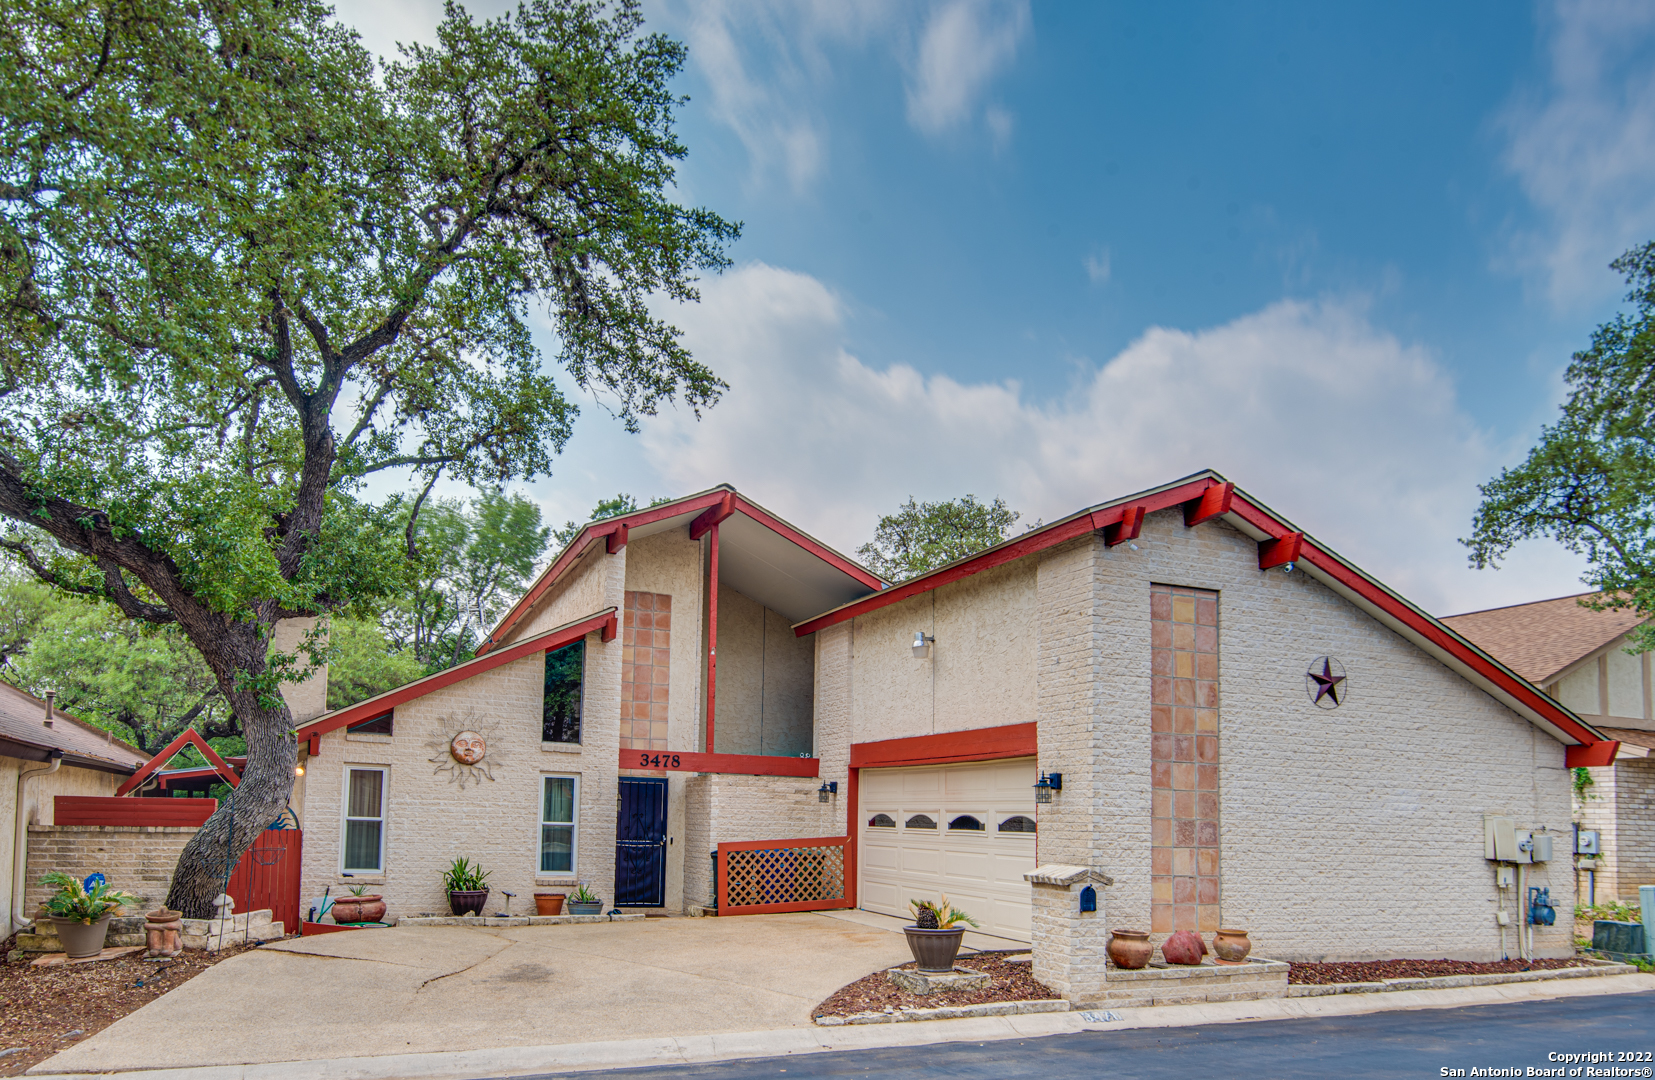 Open House July 1, 12-4pm.Excellent opportunity in the heart of San Antonio. Do not miss this one story Garden home in established neighborhood. This 2 bedroom garden home features a living room with bar, separate dining room, kitchen with breakfast area, backyard with covered patio and a 22 x 10 atrium with endless possibilities. Master bedroom has a 10 x 11 room with closet that can be used as an office, study, office, nursery etc... House backs up to park to the church behind it. Gated for quick access to park in the back. Roof replaced April 2016. Home is very low maintenance  (no grass to worry about) Quiet neighborhood with close proximity to 410, shopping, schools and restaurants. Low HOA fee! Refrigerator, washer and dryer convey depending on offer.